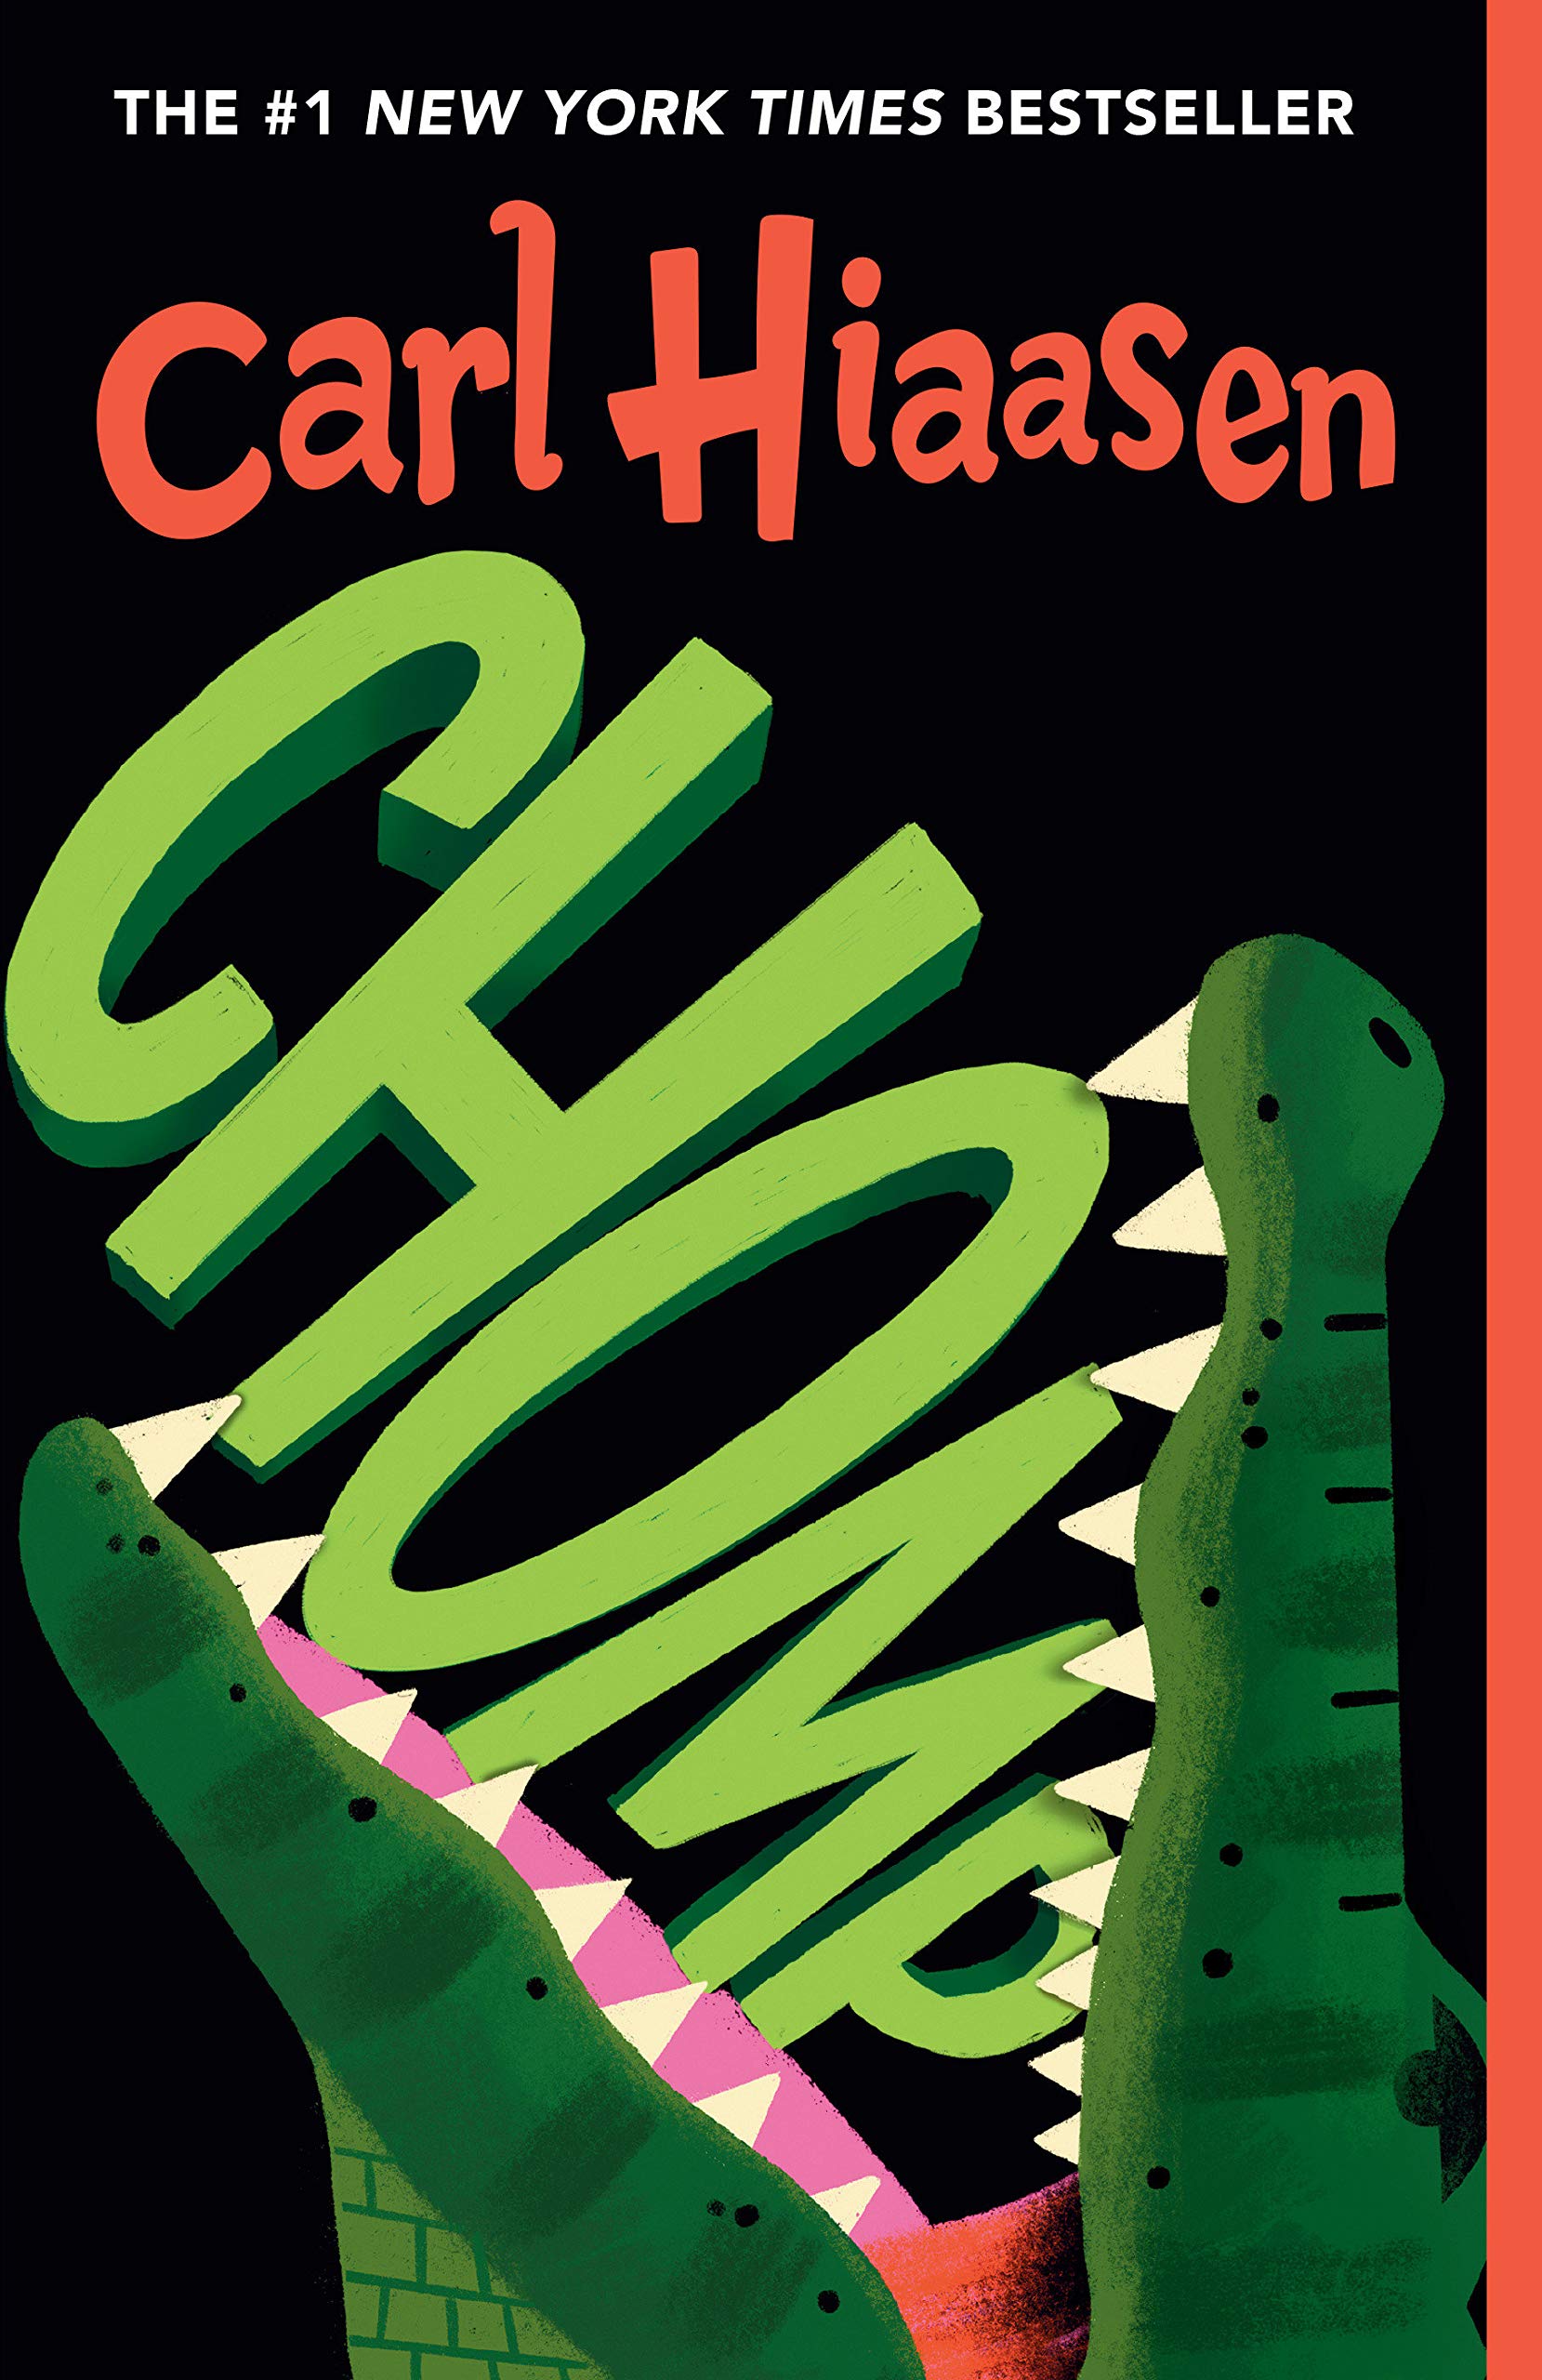 Cover of the book Chomp. Features an illustration of an alligator opening its mouth to eat the text of the title, which is written in capital green letters.